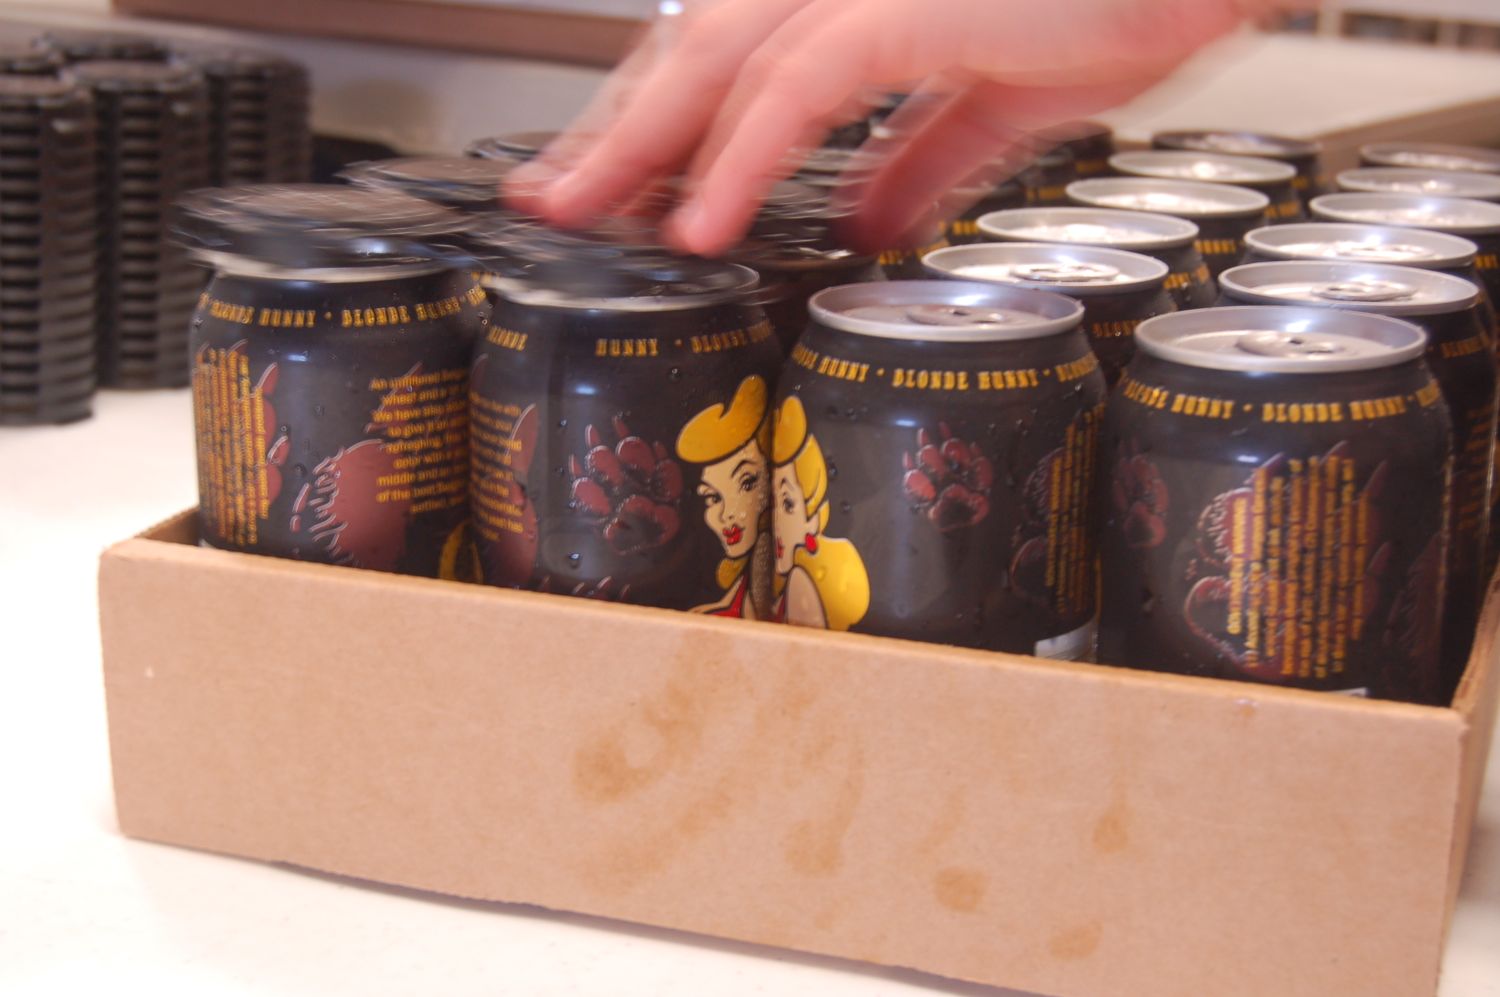 Virginia Craft Brew Canning History Made Wednesday At Wild Wolf Brewing : With Video Clip